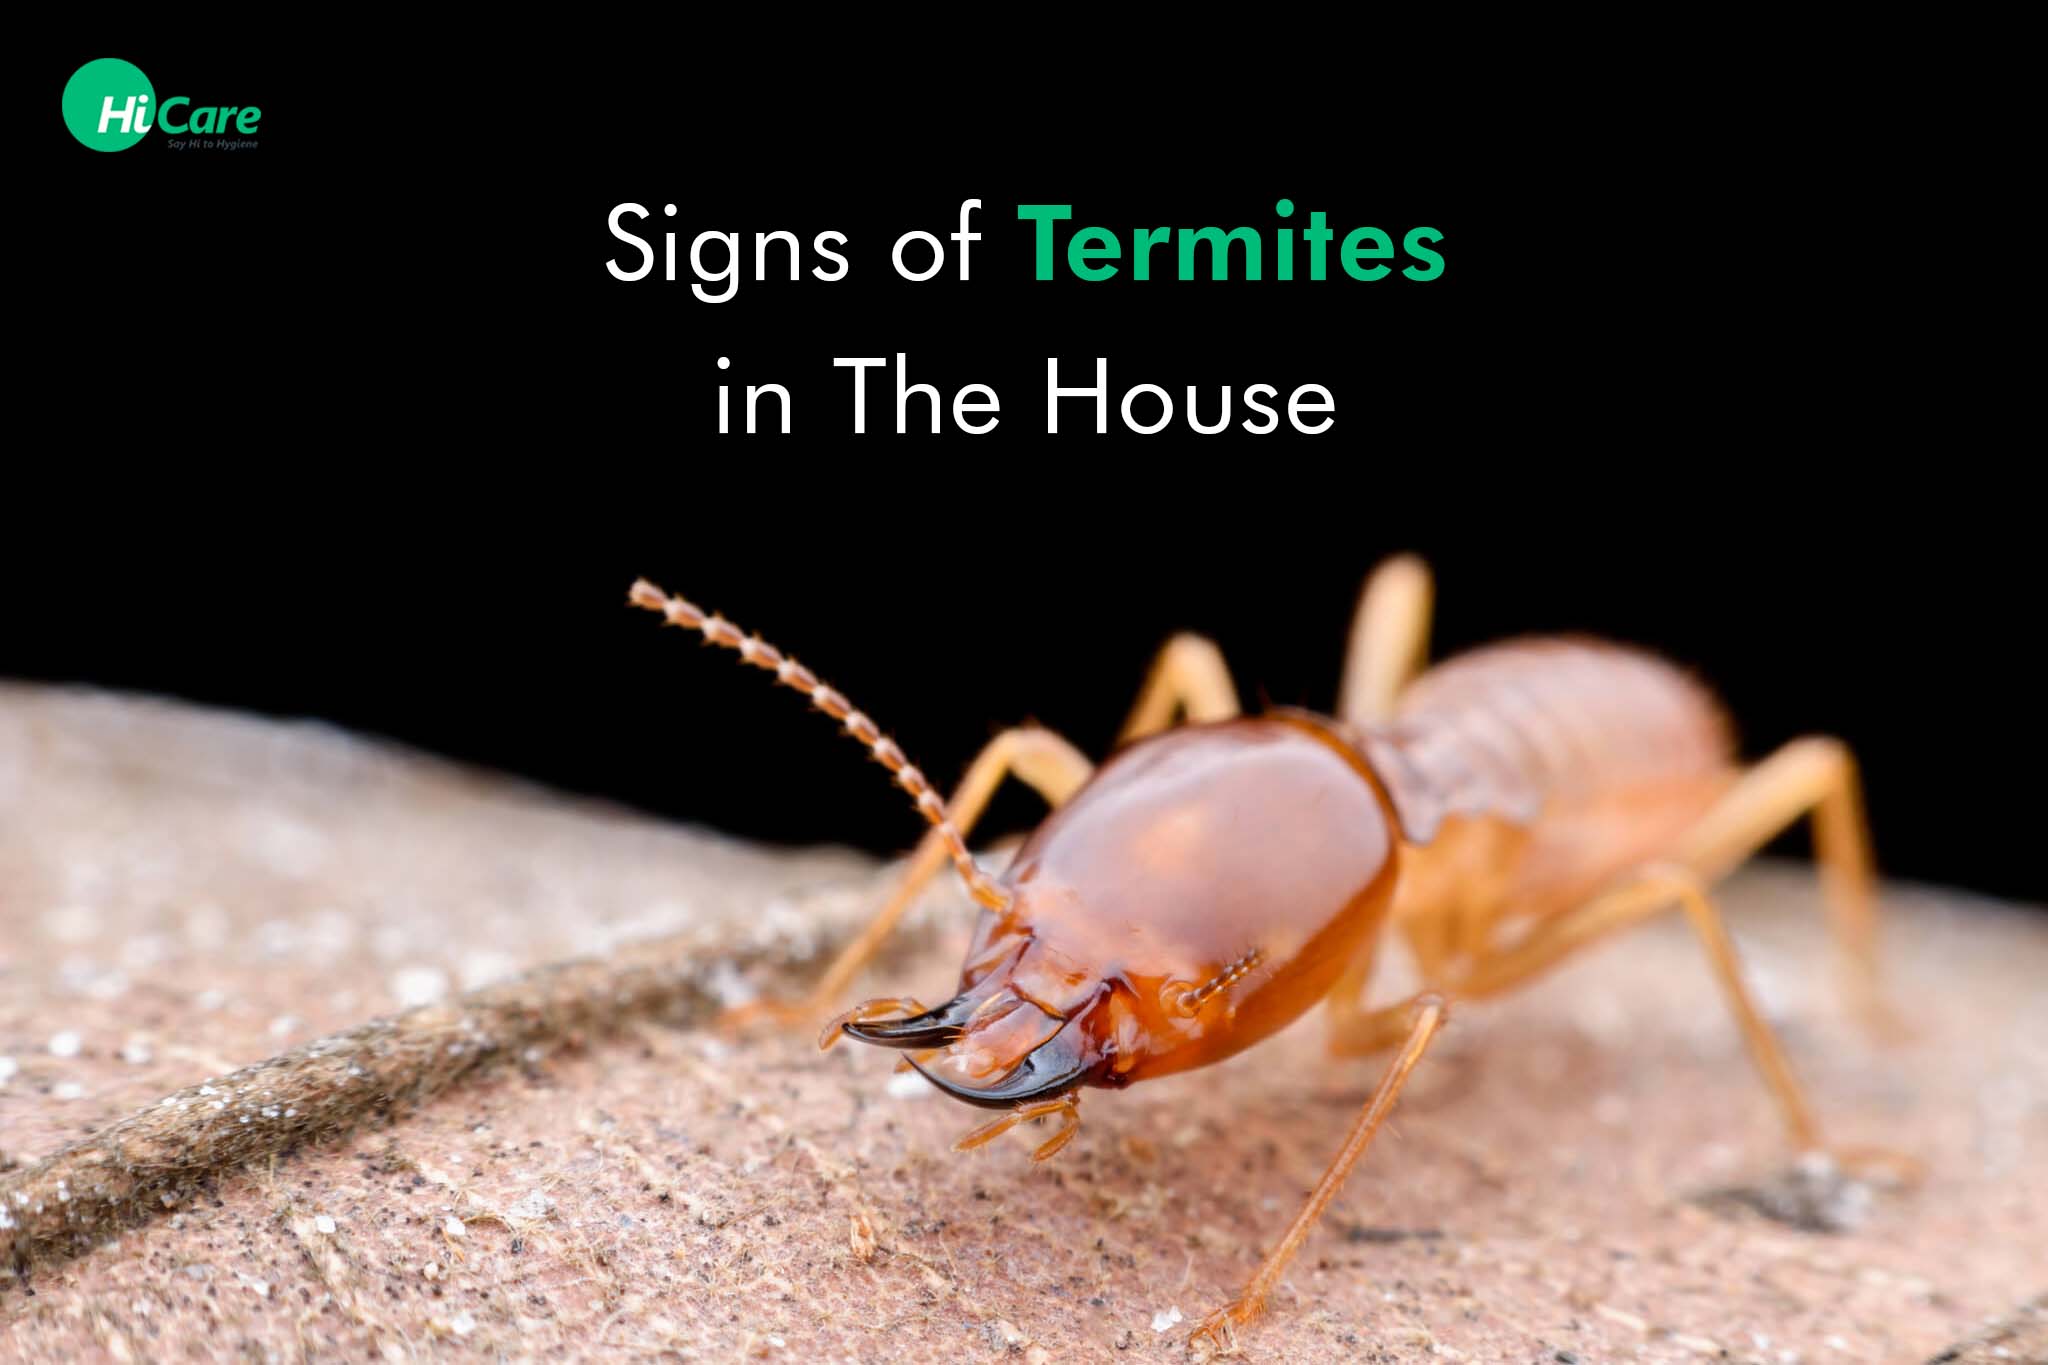 Top 10 Signs of Termite Infestations in the House